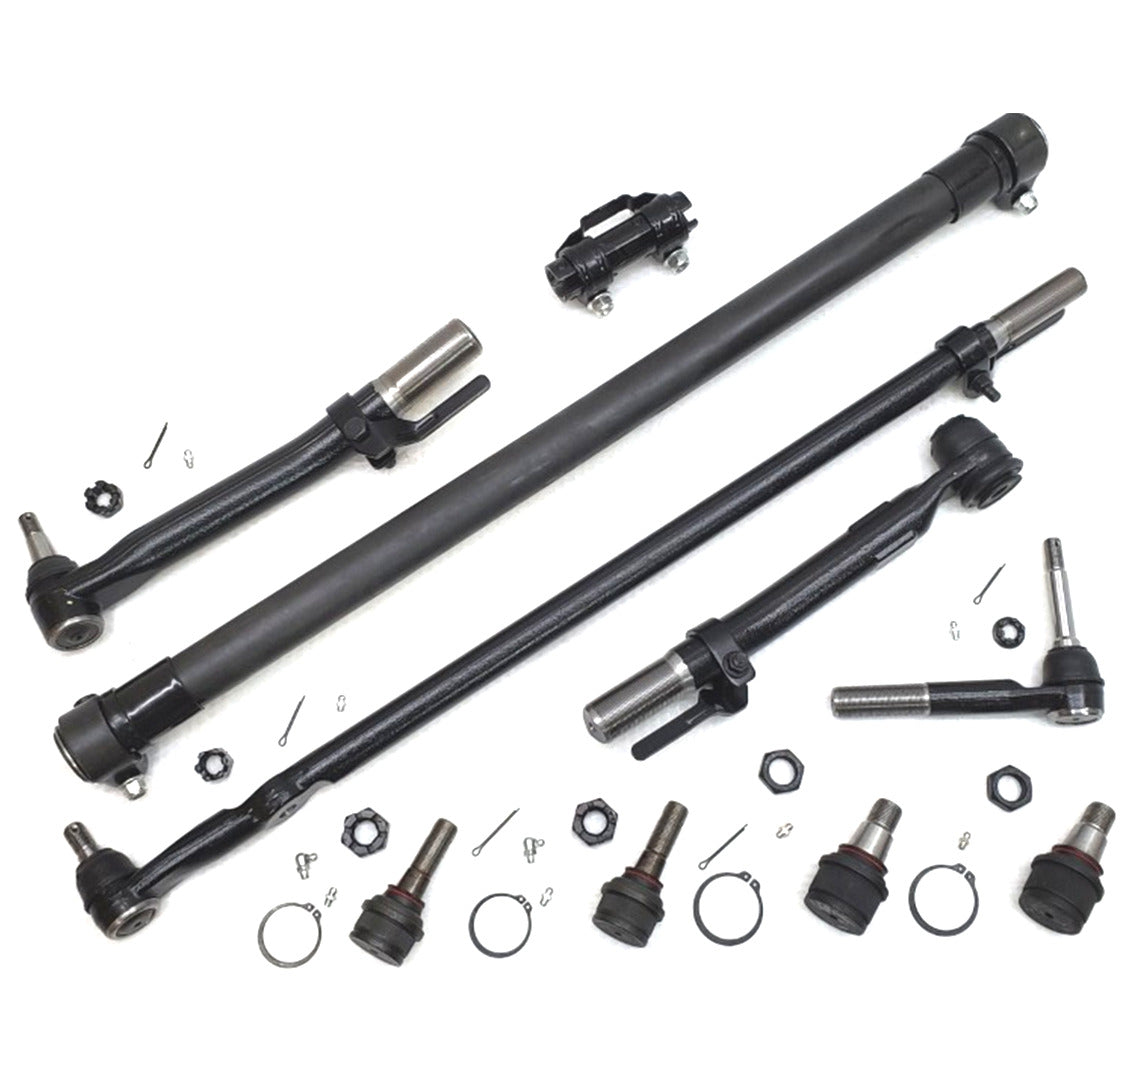 Lifetime Ball Joints Tie Rods Drag Link Steering Kit for 2011-2016 Ford F250, F350 Super Duty 4x4 SRW